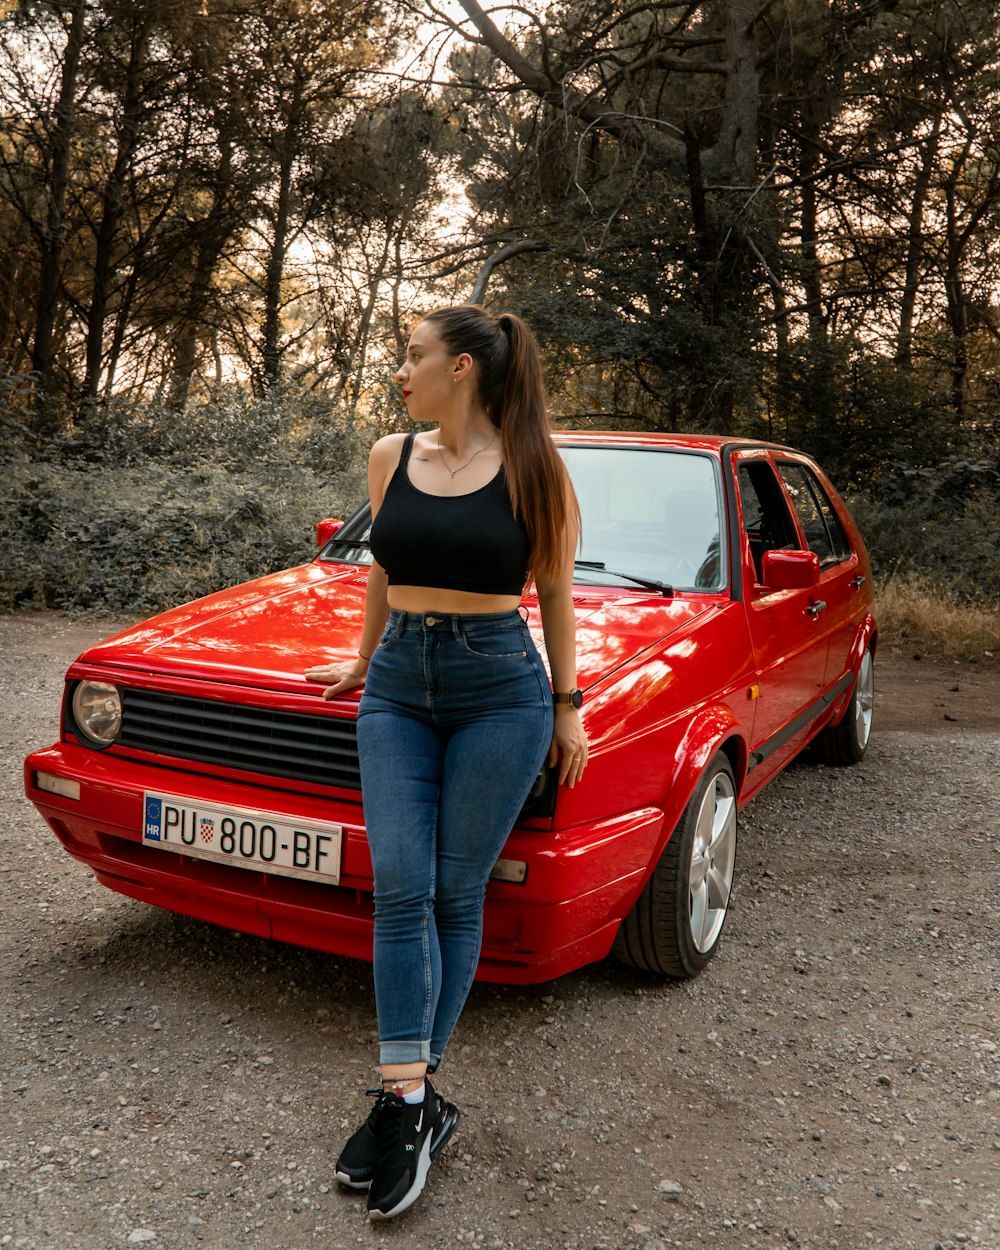 a woman standing next to a red car